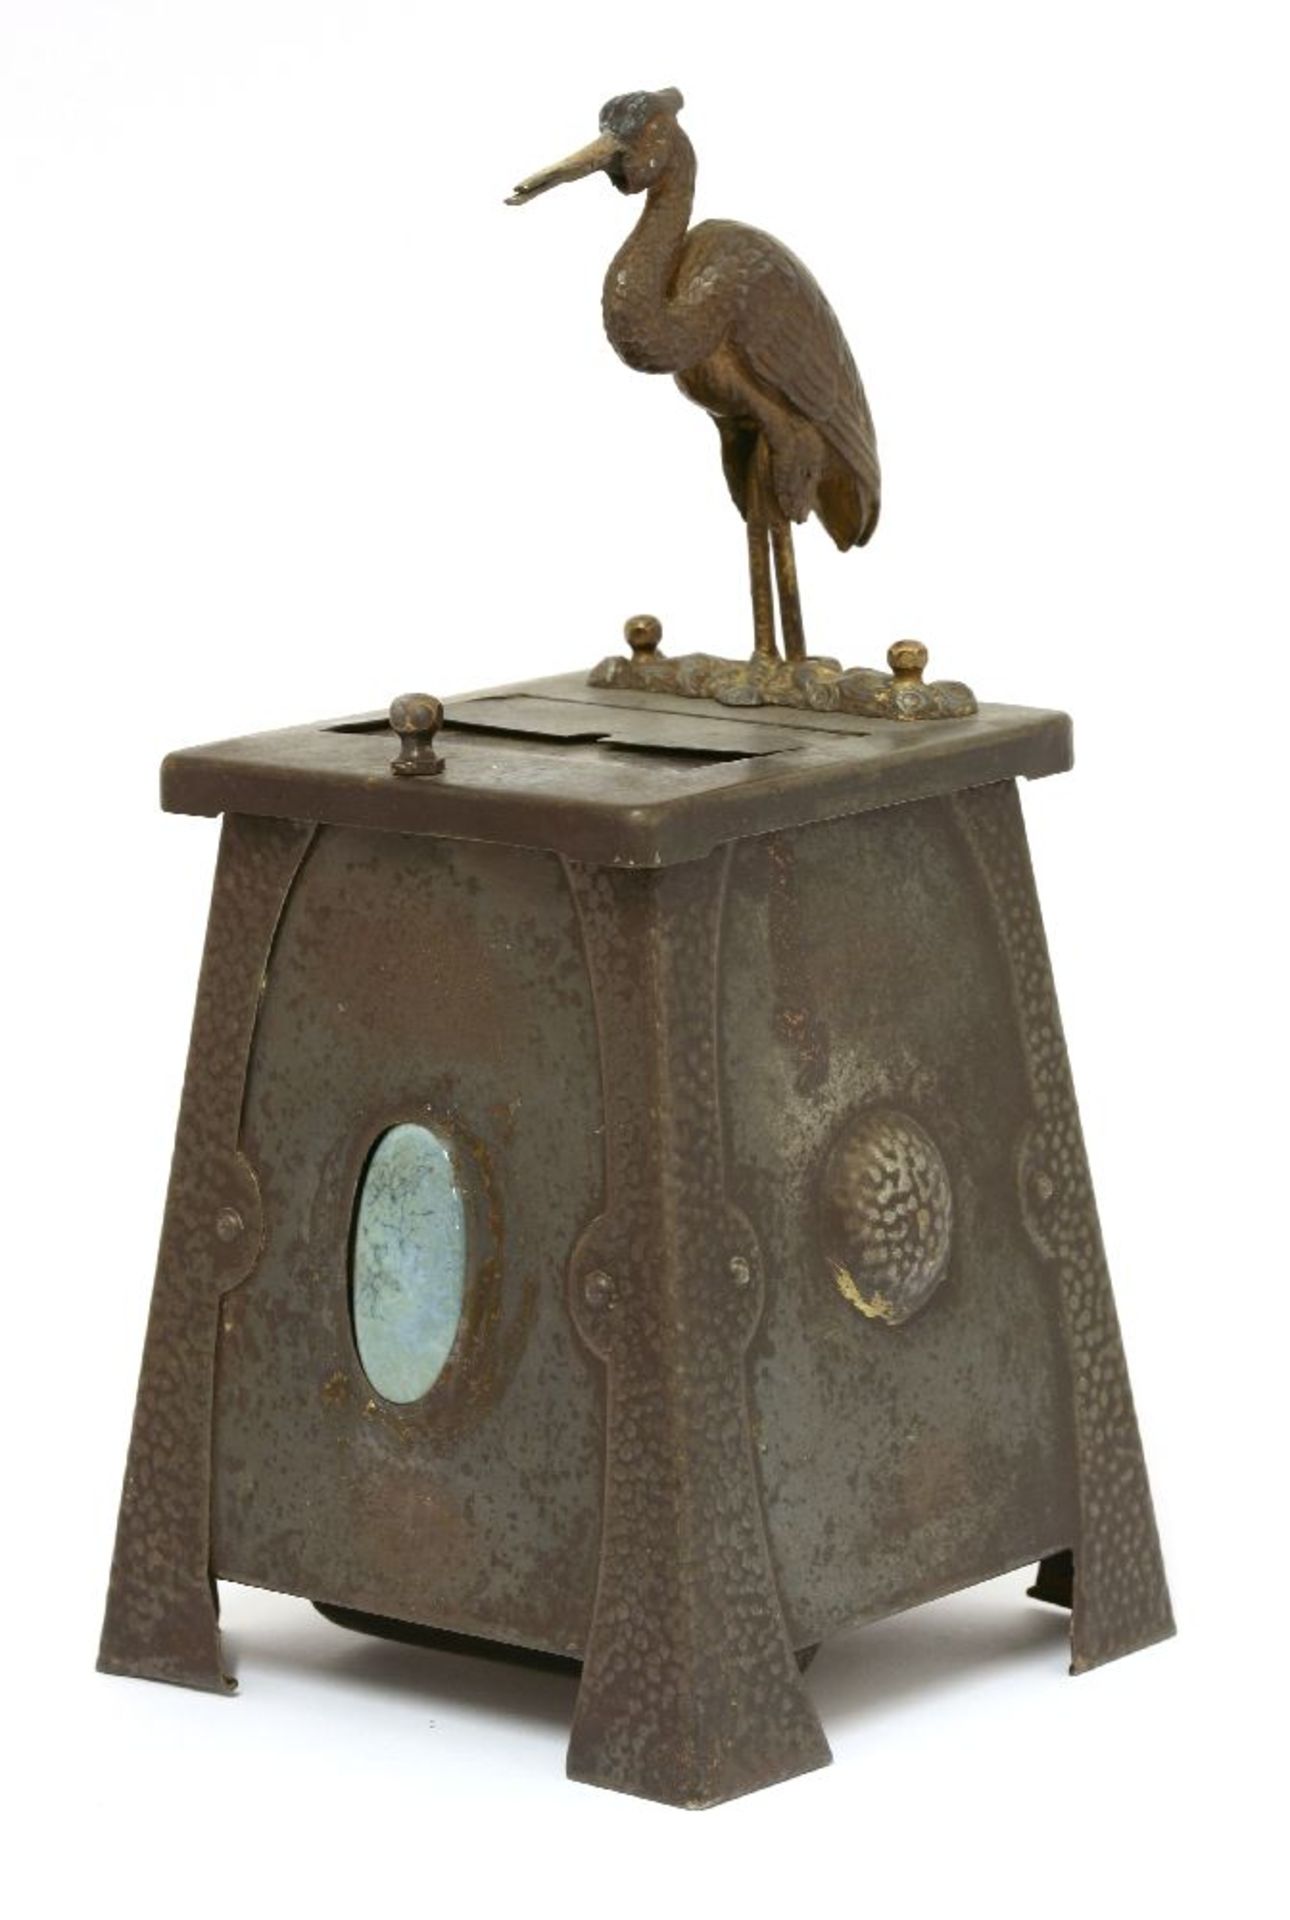 An Art Nouveau tinplate cigarette dispenser,mounted with a stork automata, the front panel mounted